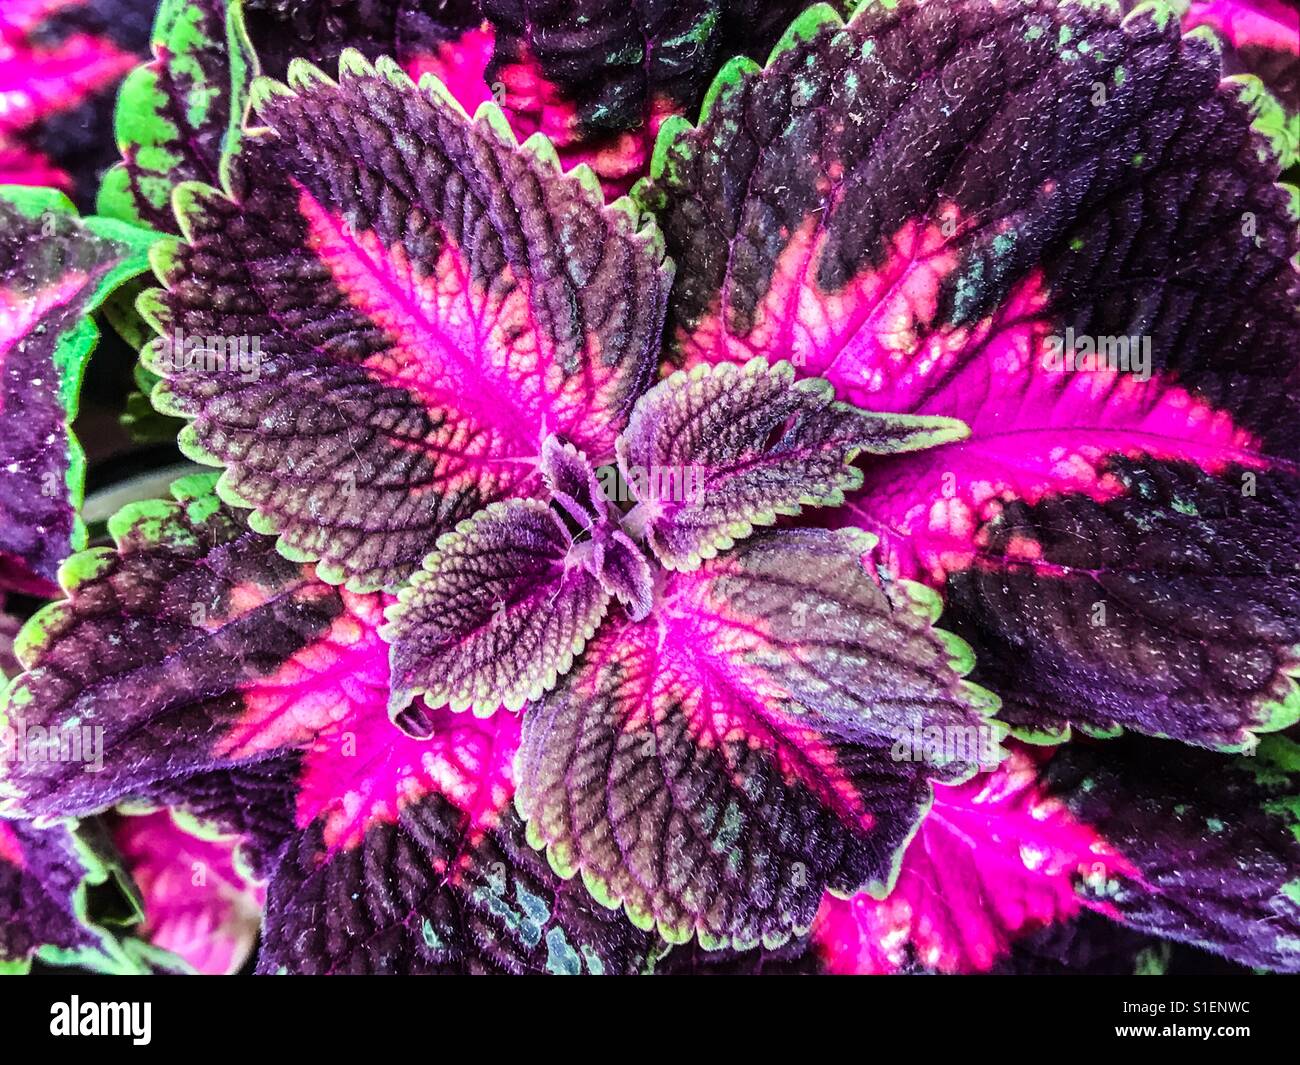 Colourful plant close up Stock Photo